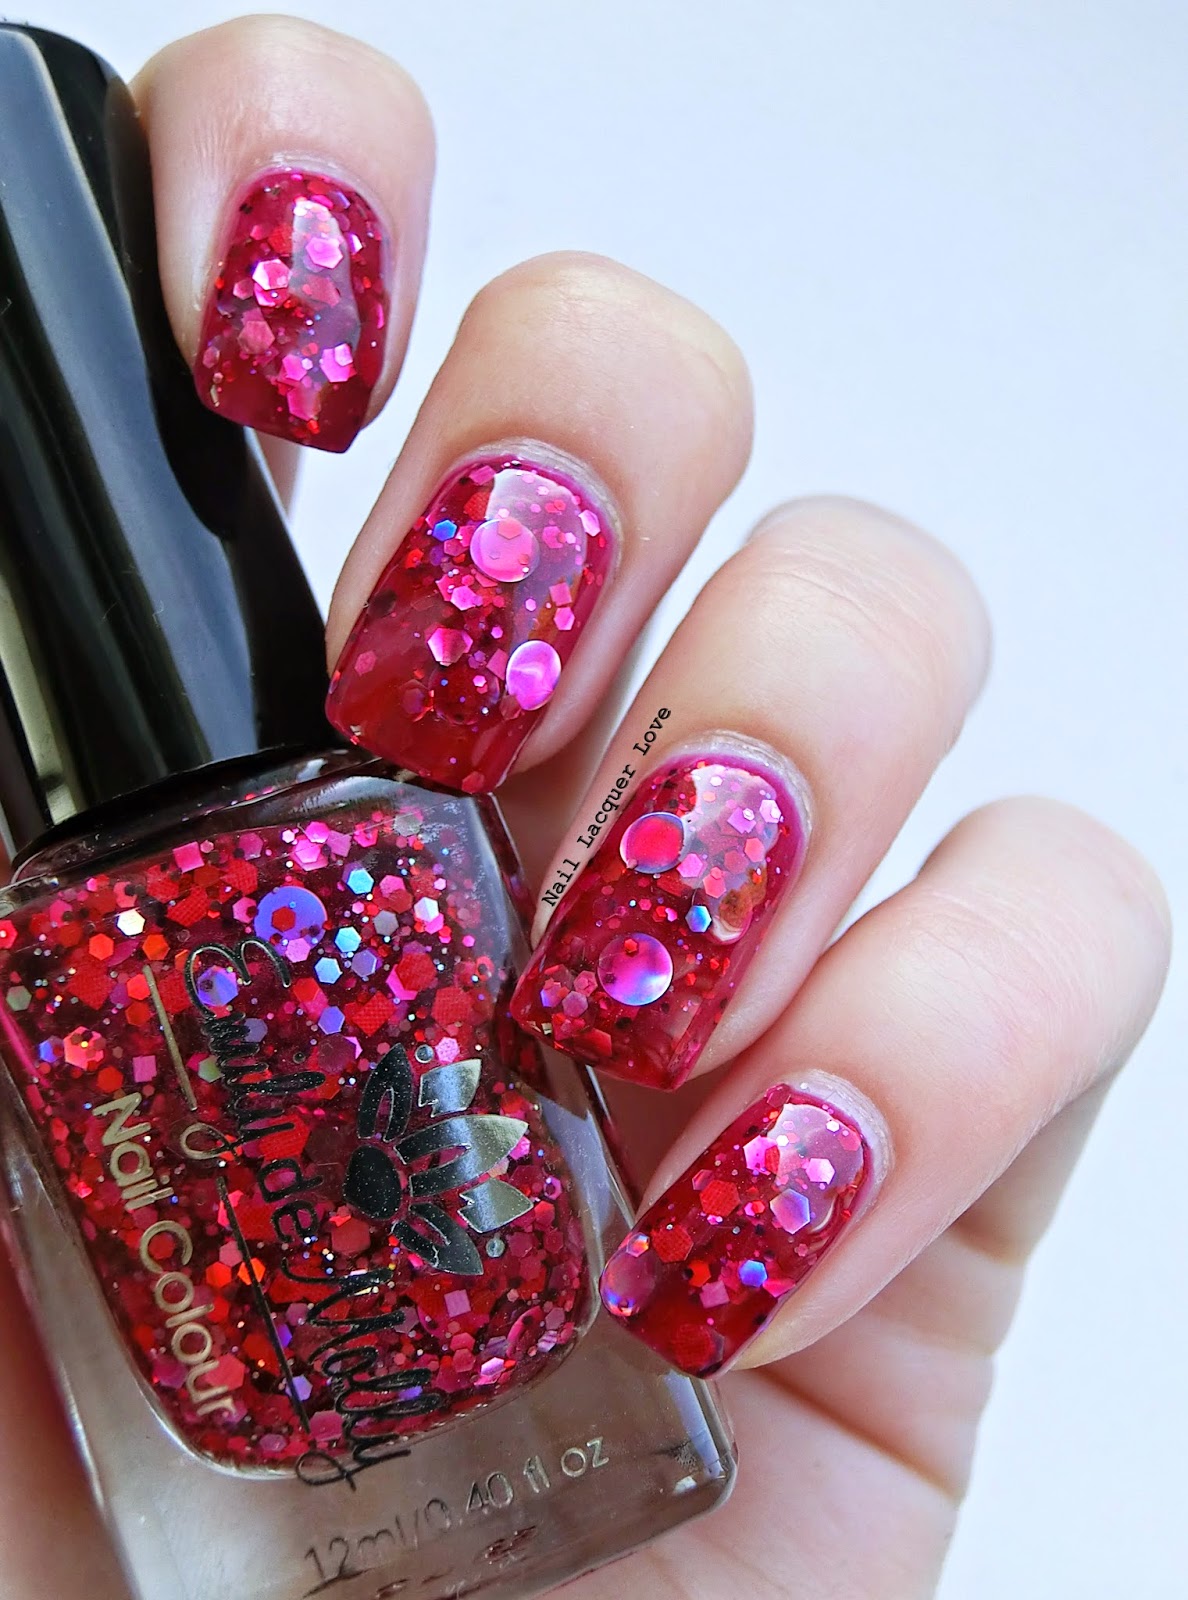 Nail Lacquer Love: Emily de Molly The Unloved